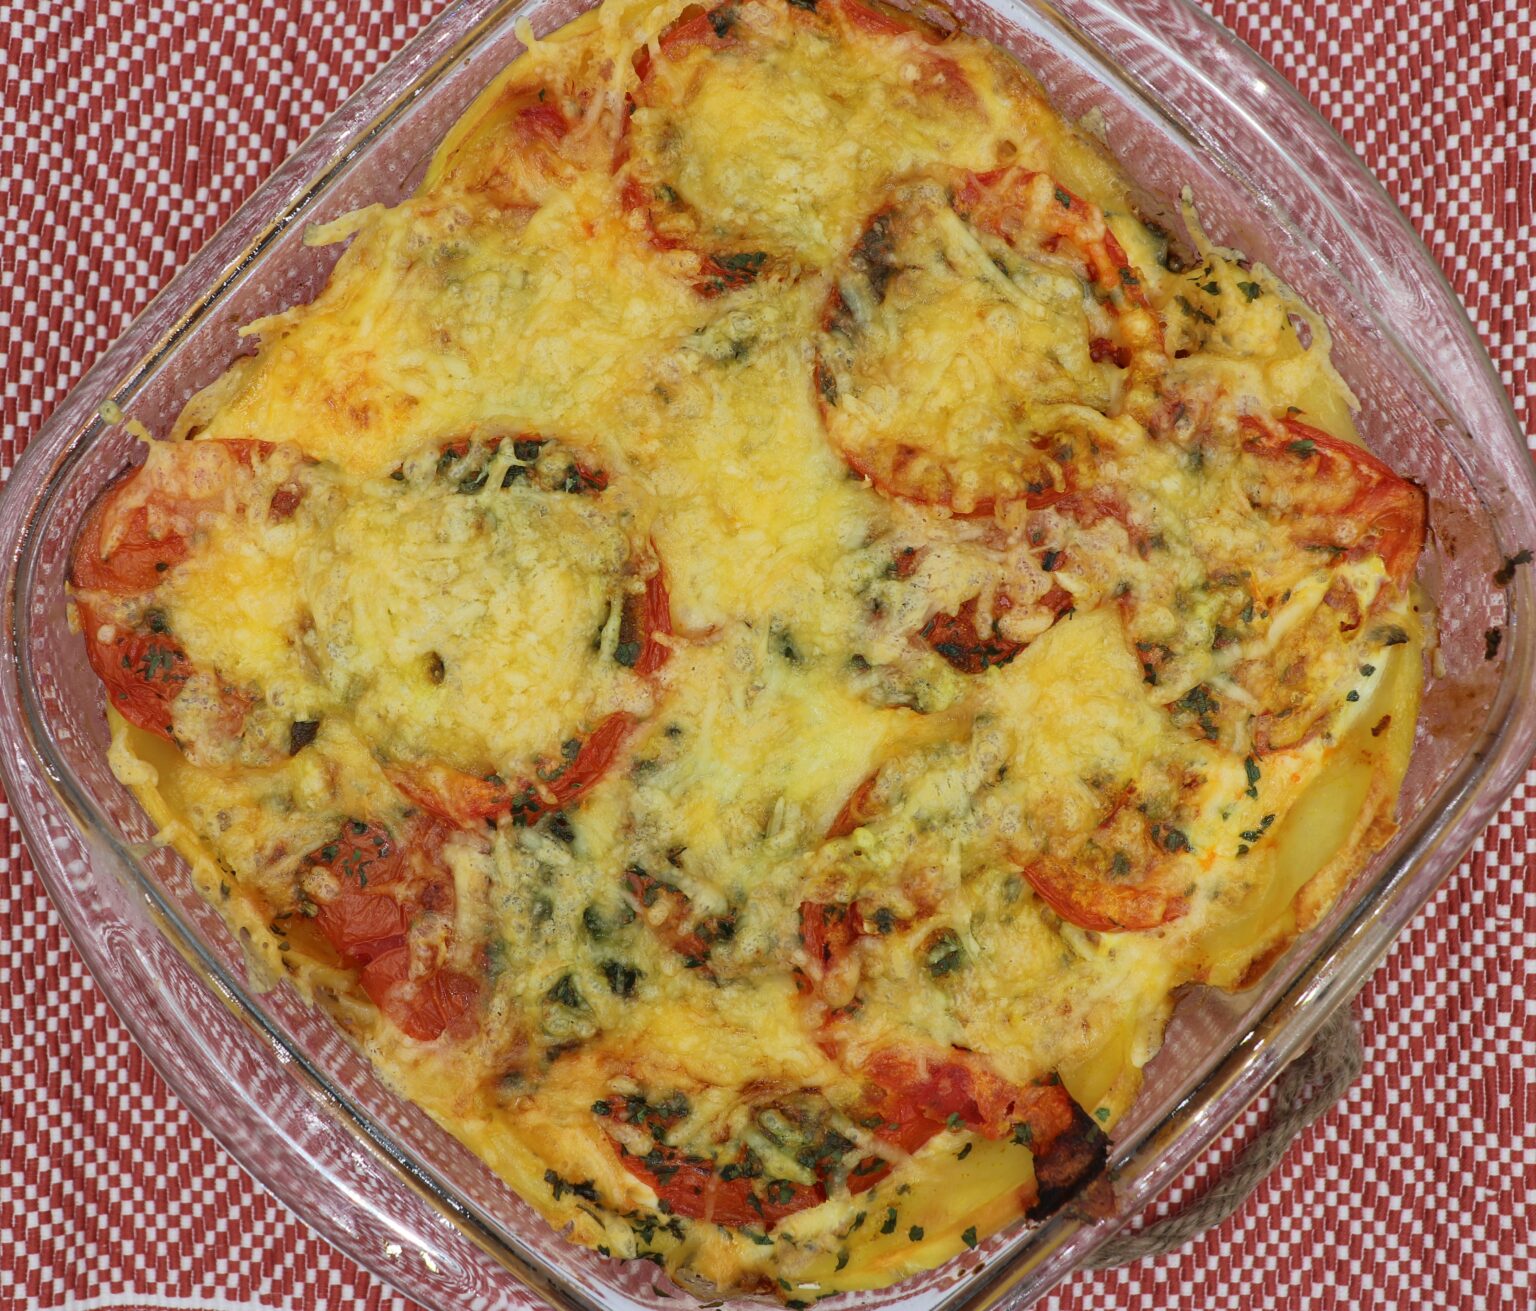 This image depicts the bright, cheesy egg and vegetable casserole